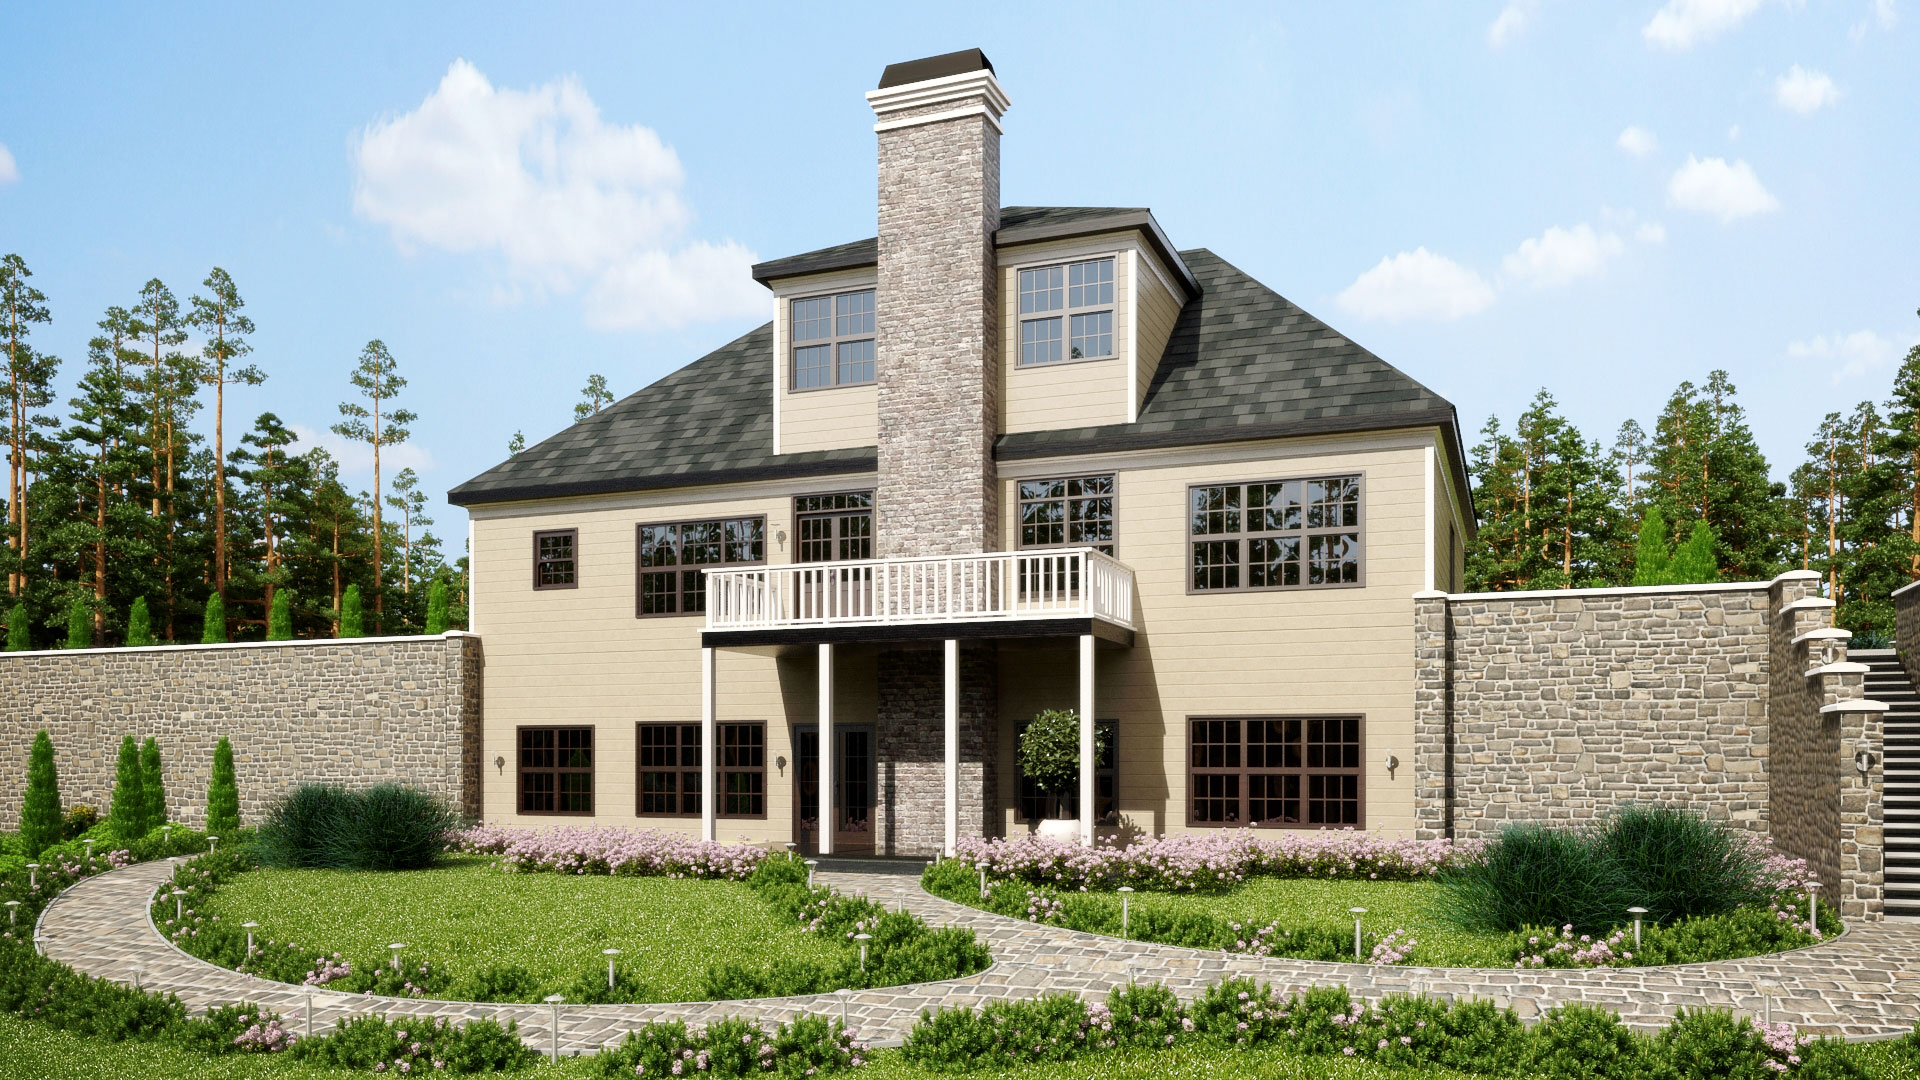  Three  Story  Southern Style House  Plan  with front porch